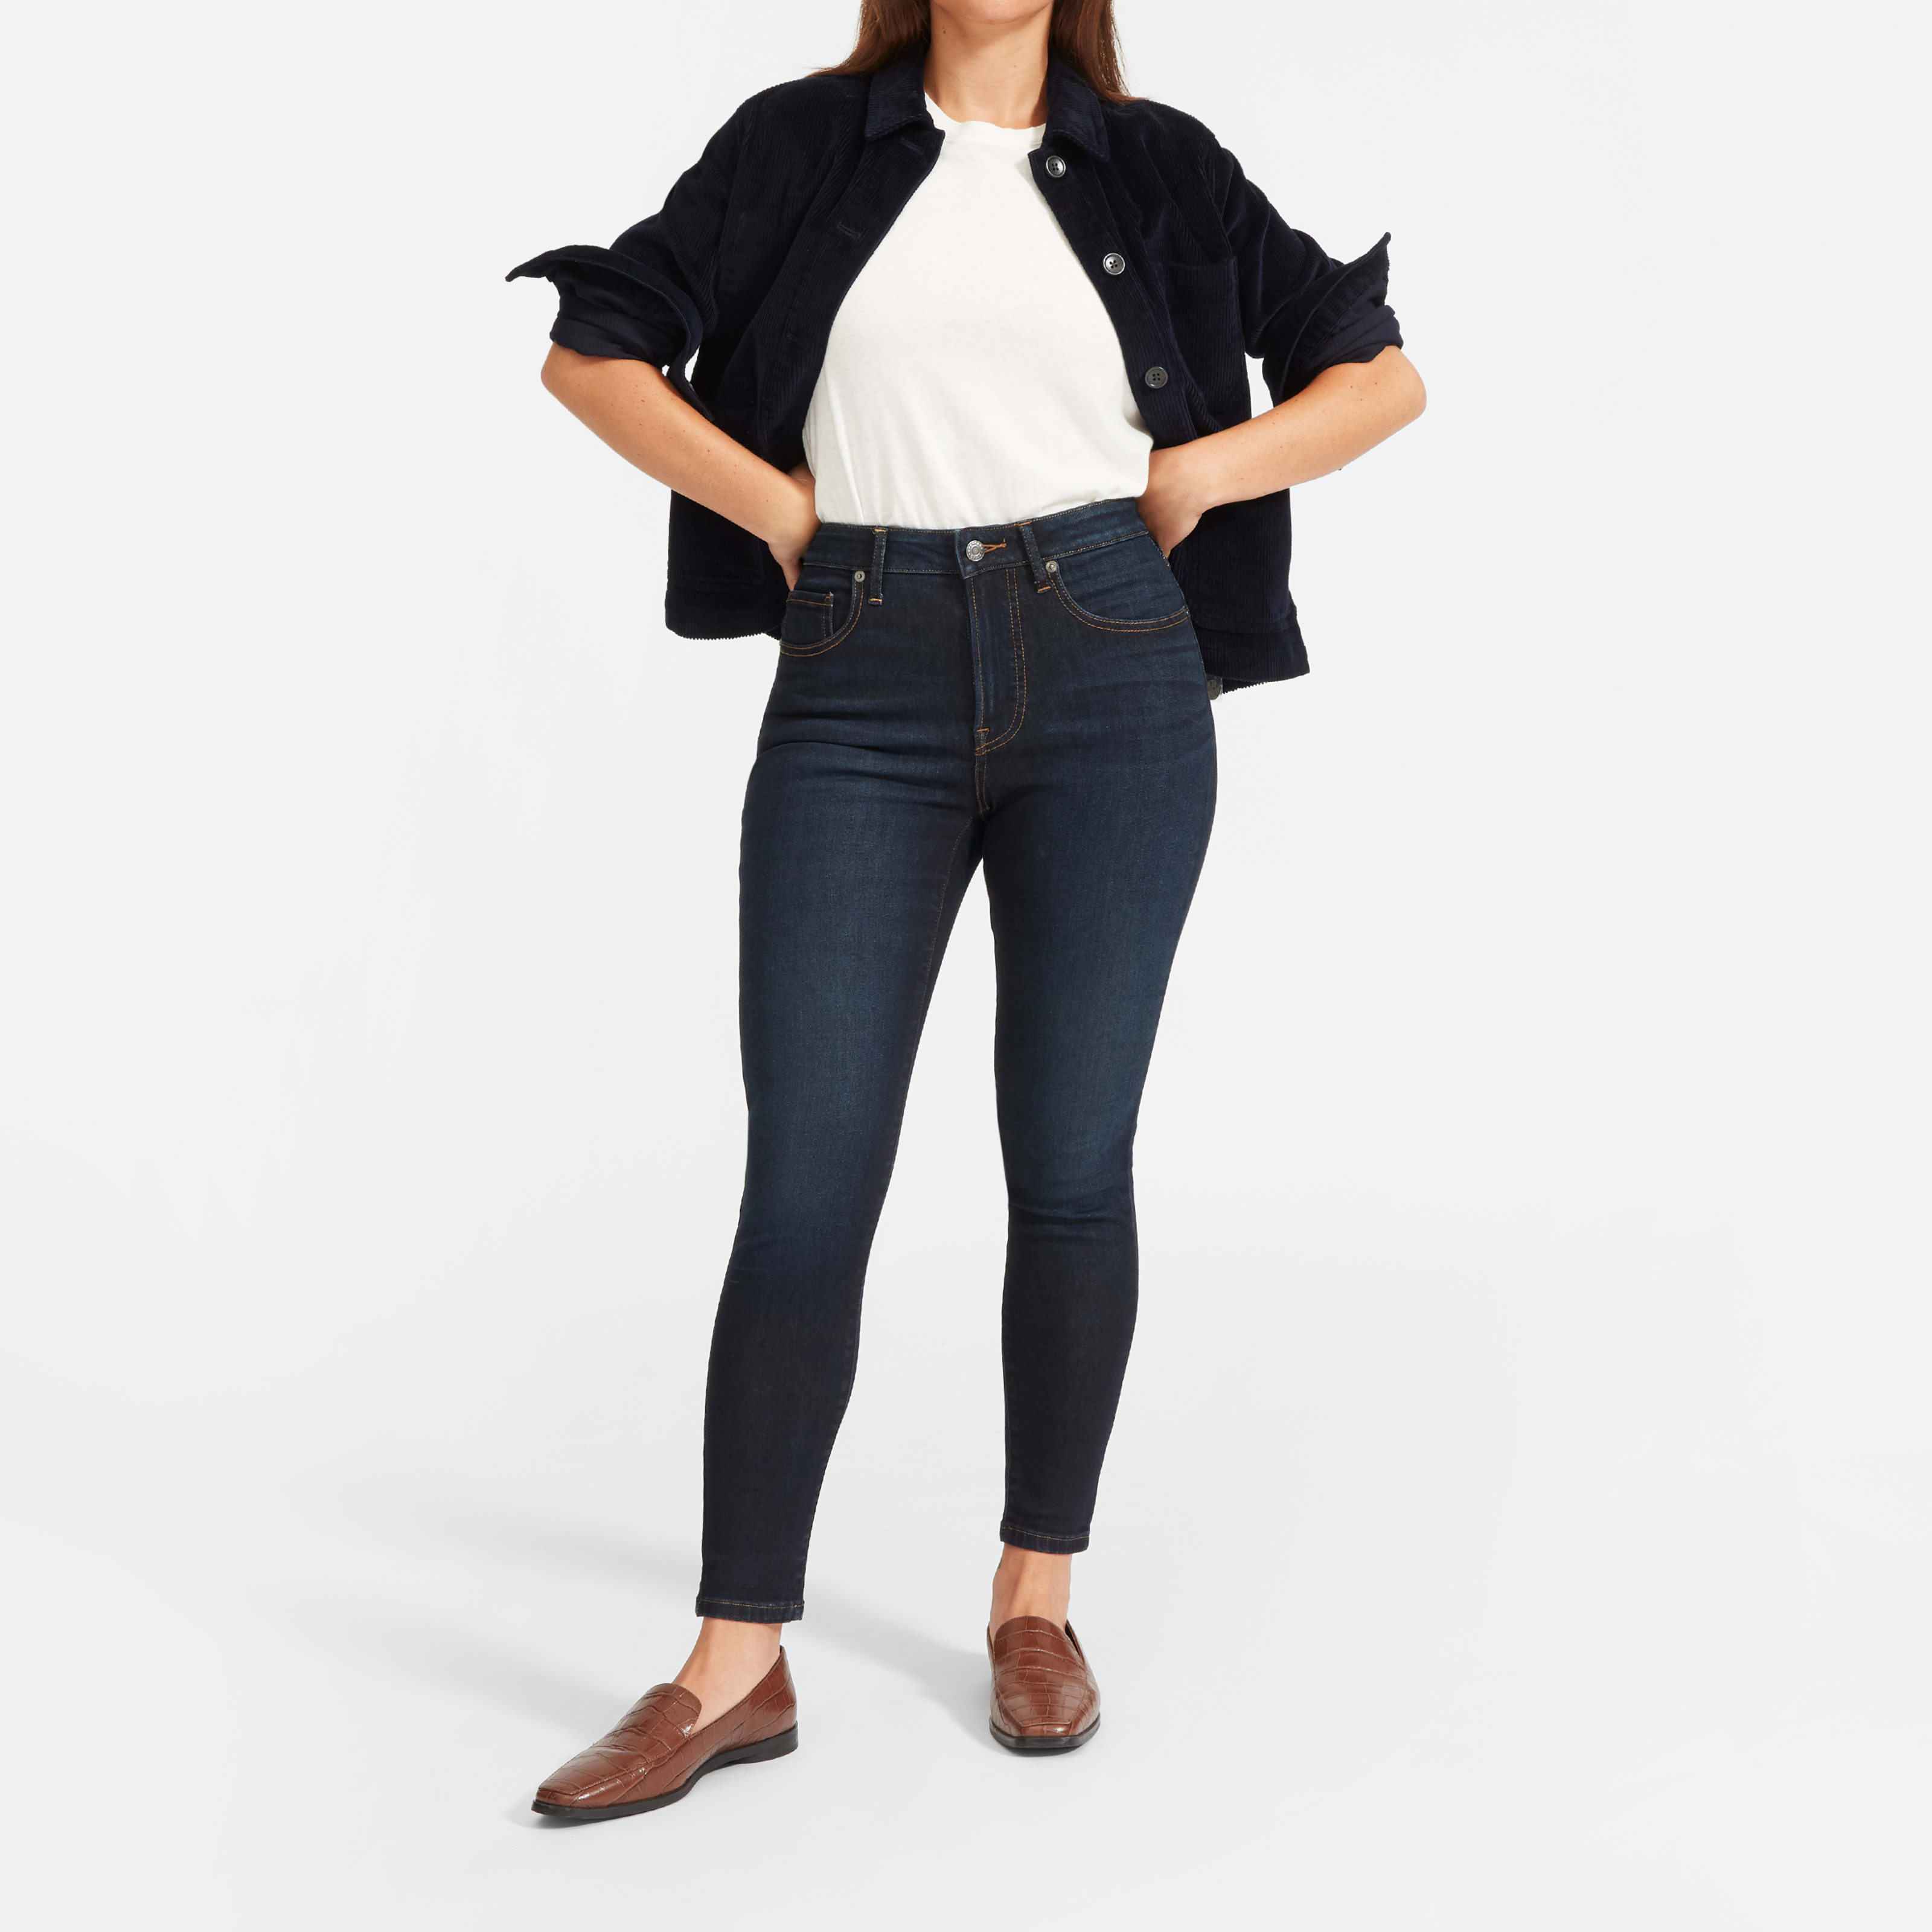 Women's Curvy Authentic Stretch High-Rise Skinny Jean By Everlane In Dark Blue Wash, Size 23